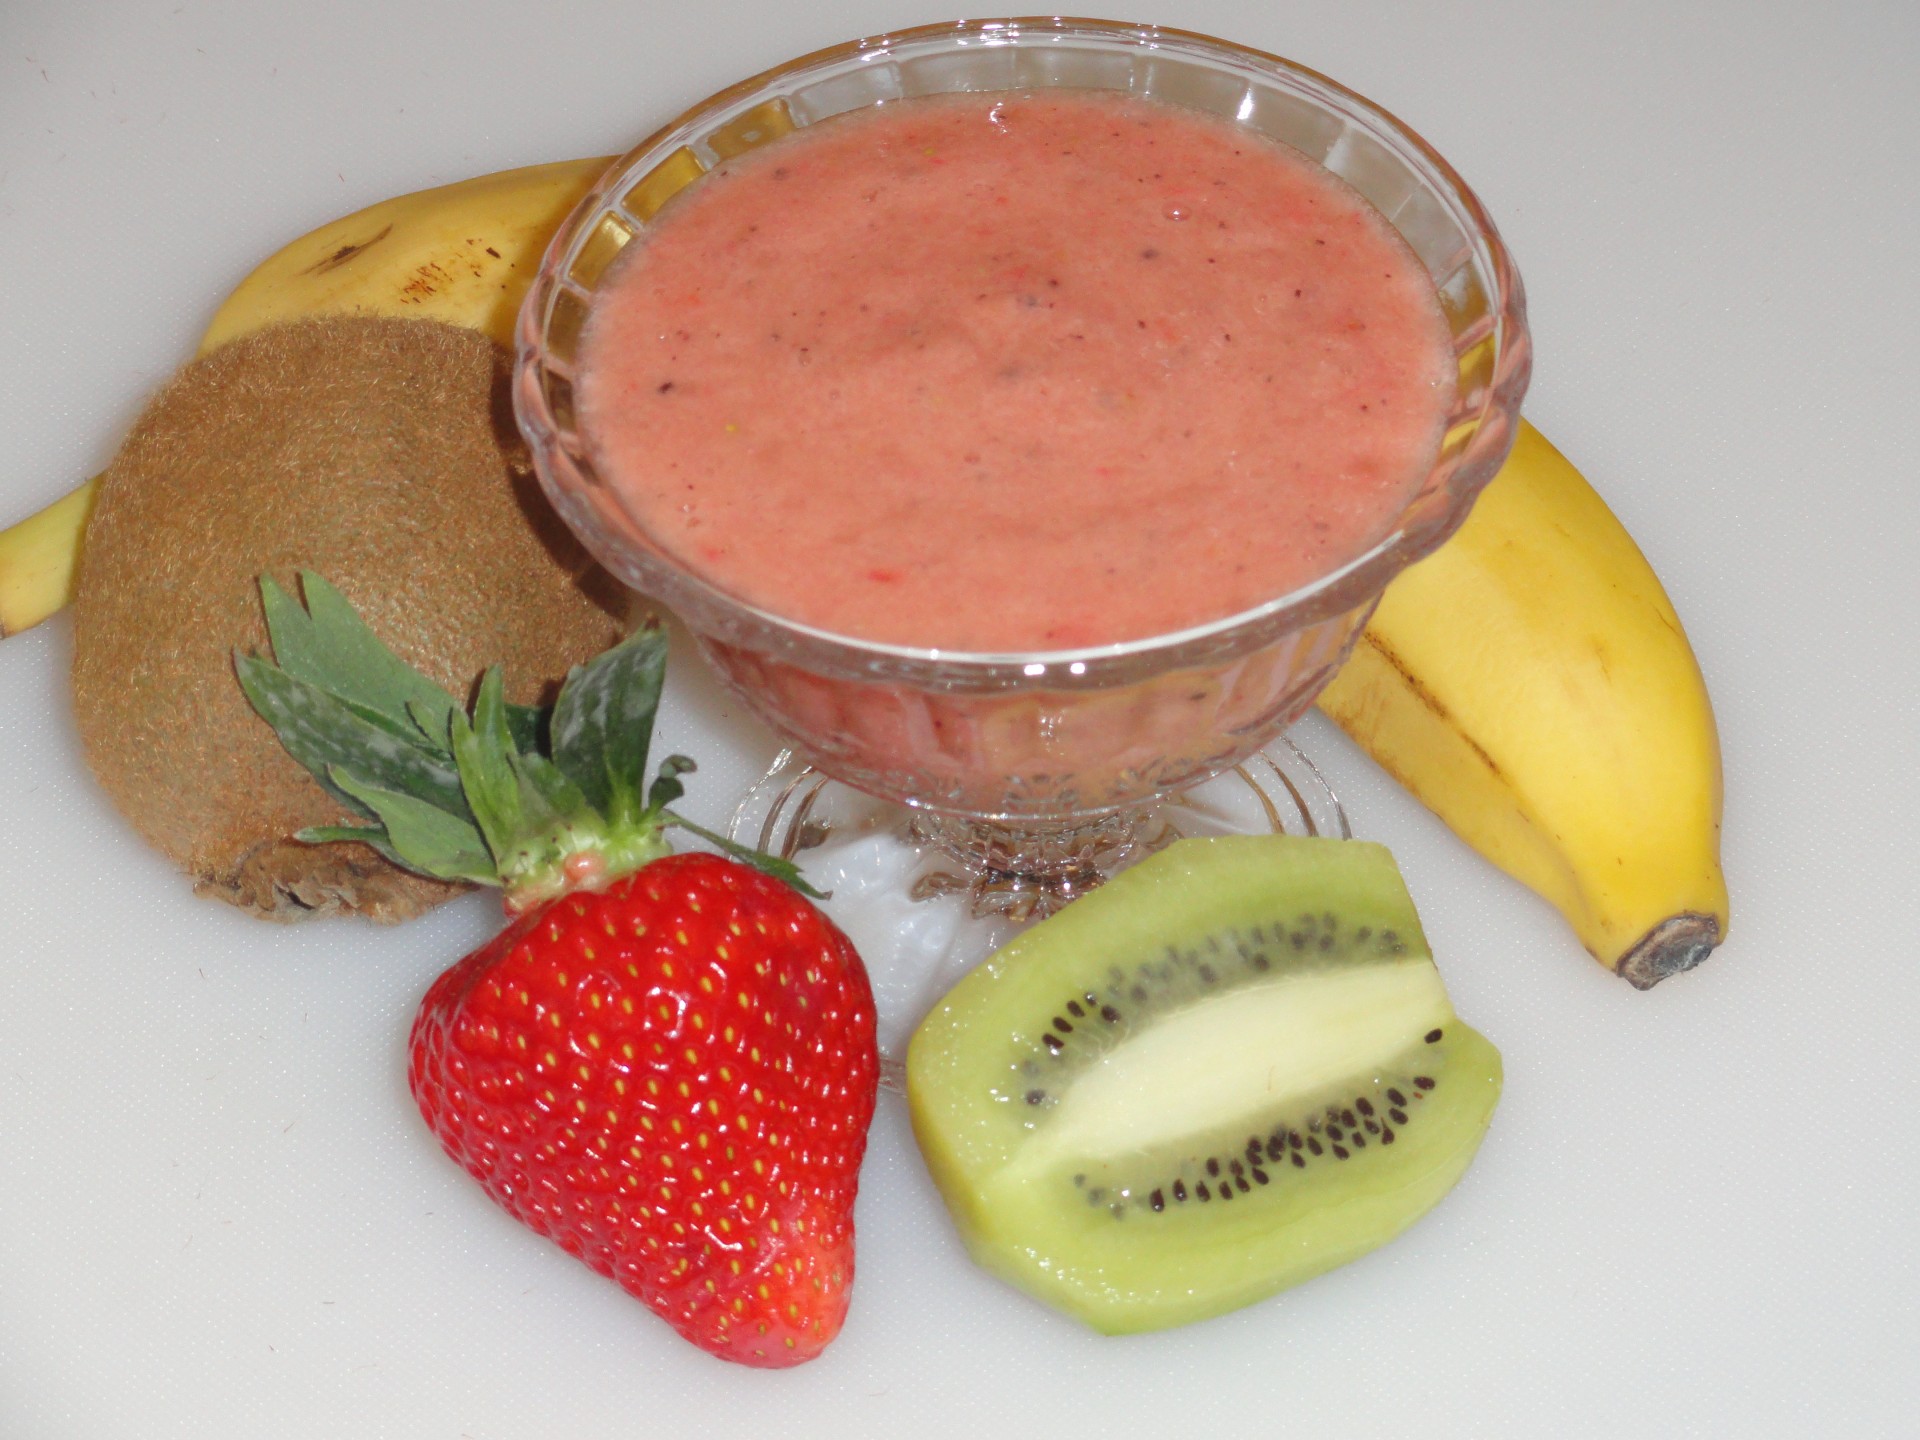 Pear-Berry Smoothie